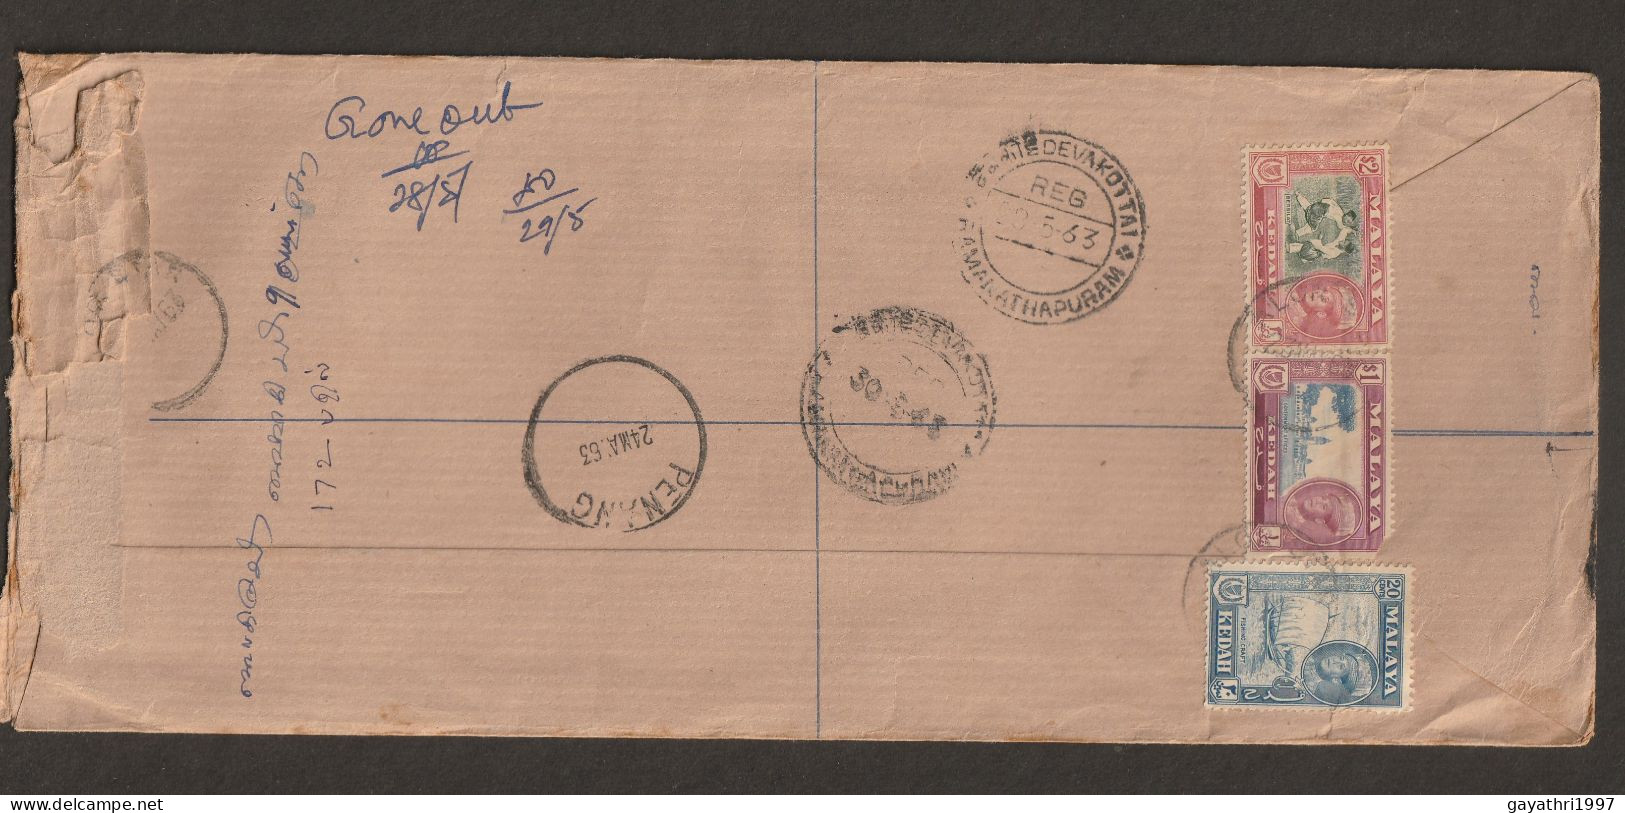 Malaya 1963 Malaya Stamp And Kedah Stamp Combined Used From Malaya To India Long Cover High Value Stamp(L8) - Kedah